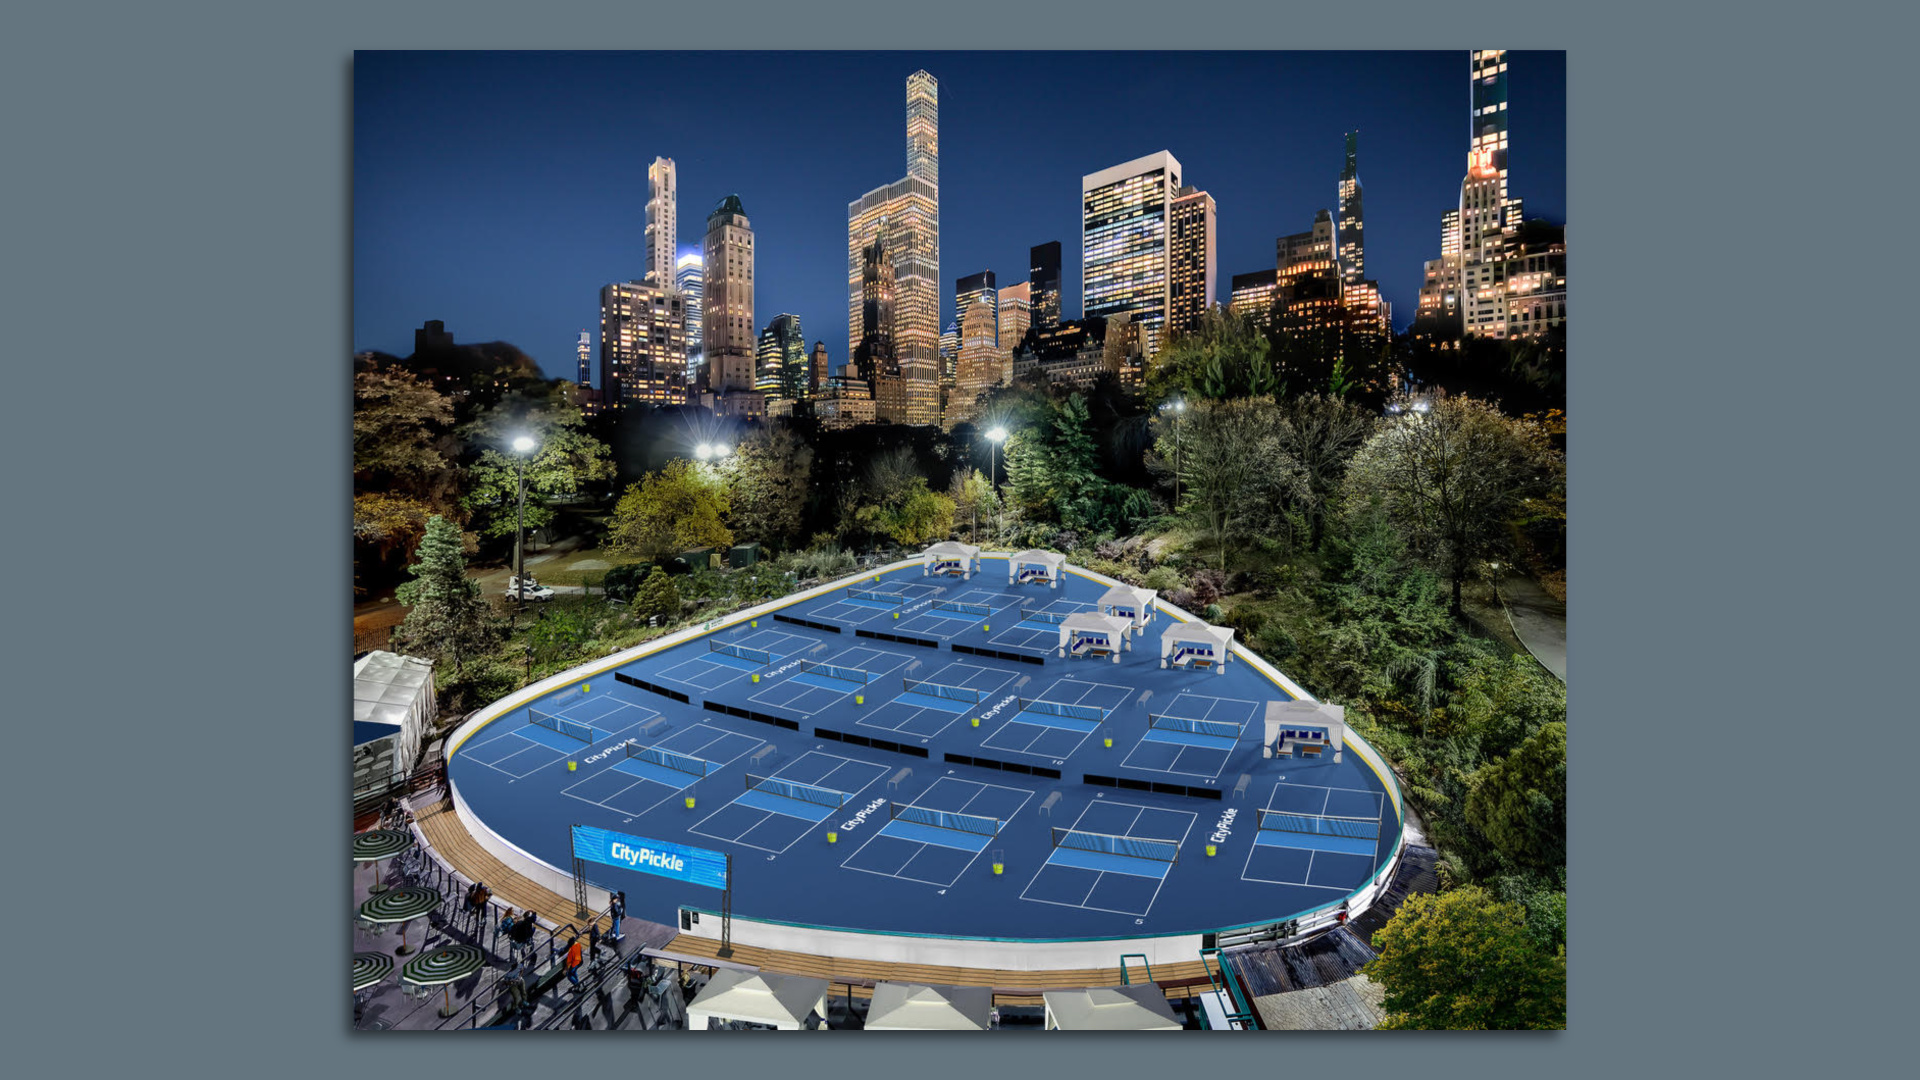 Rendering of the pickleball courts slated for Central Park in New York City.